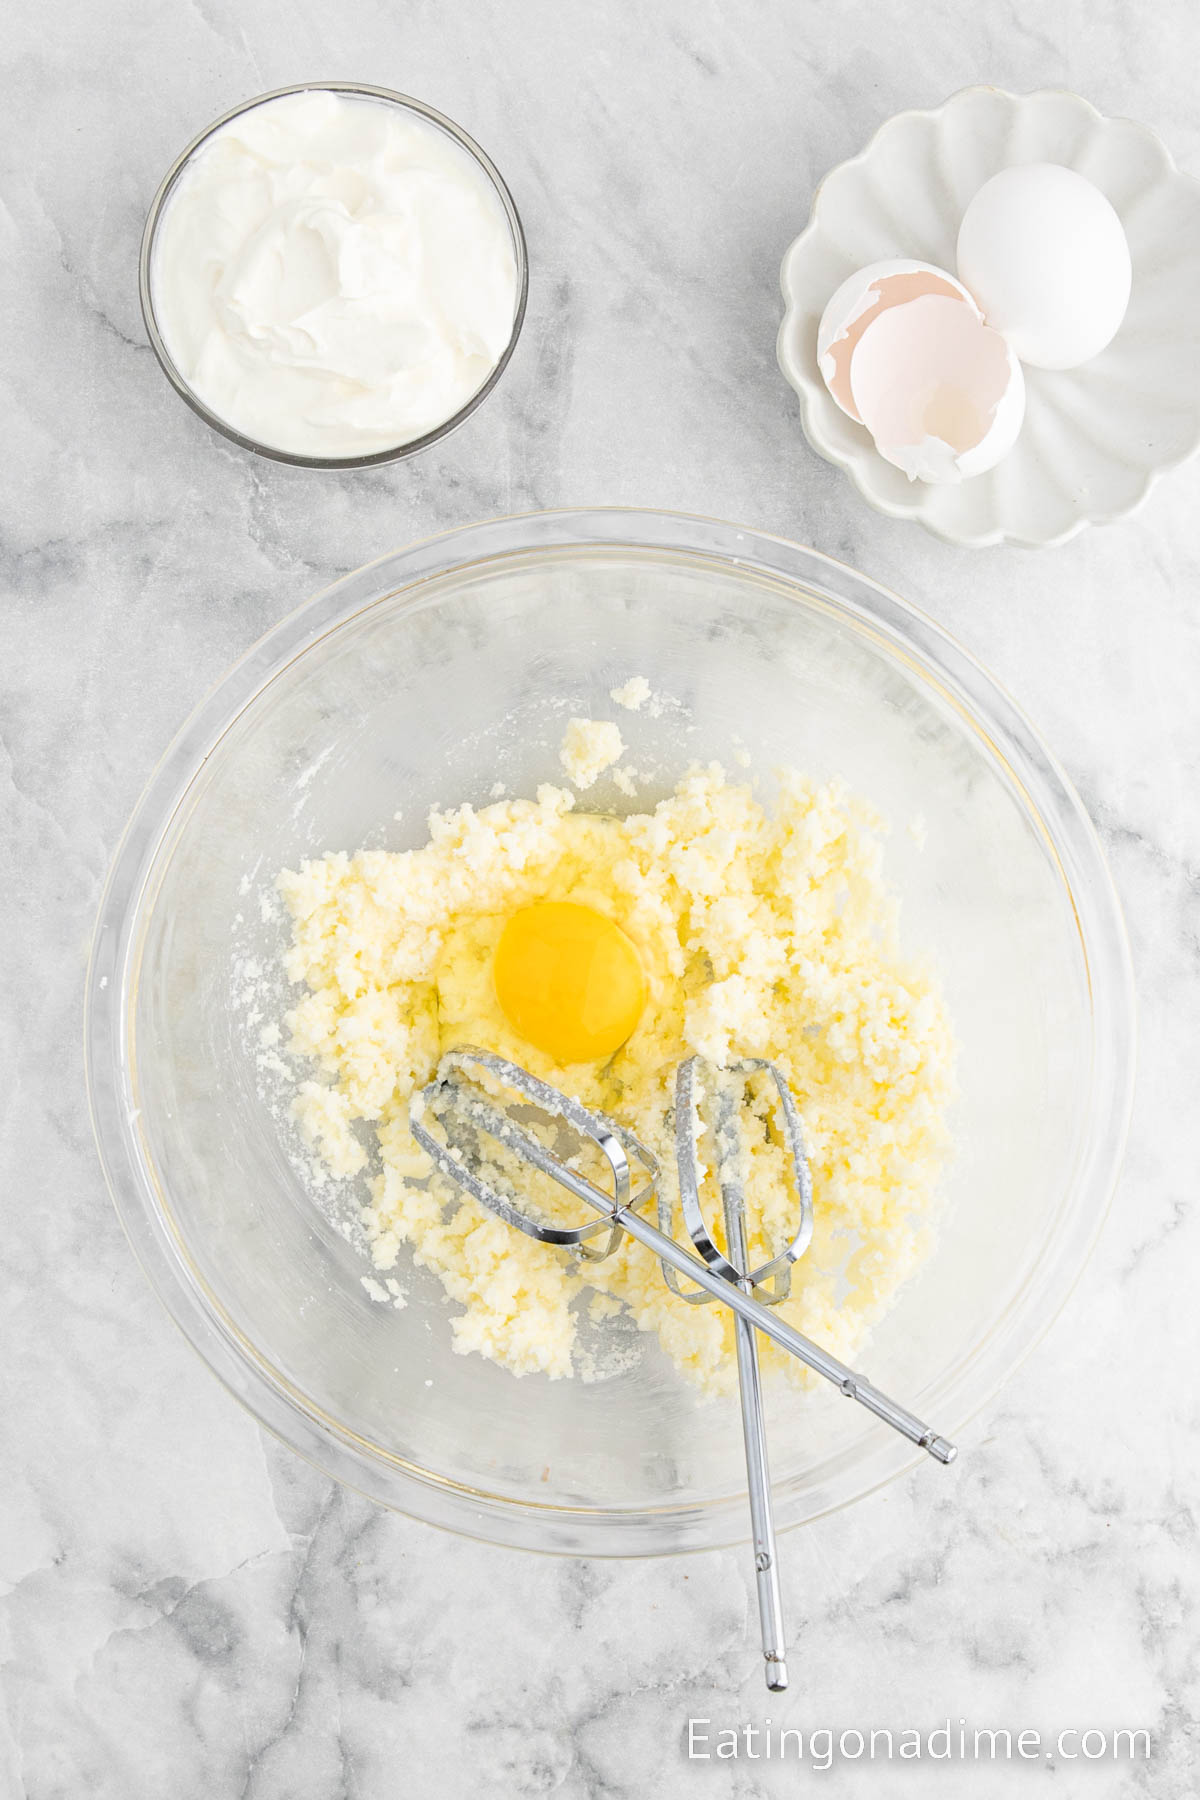 Mixing sugars with butter and eggs